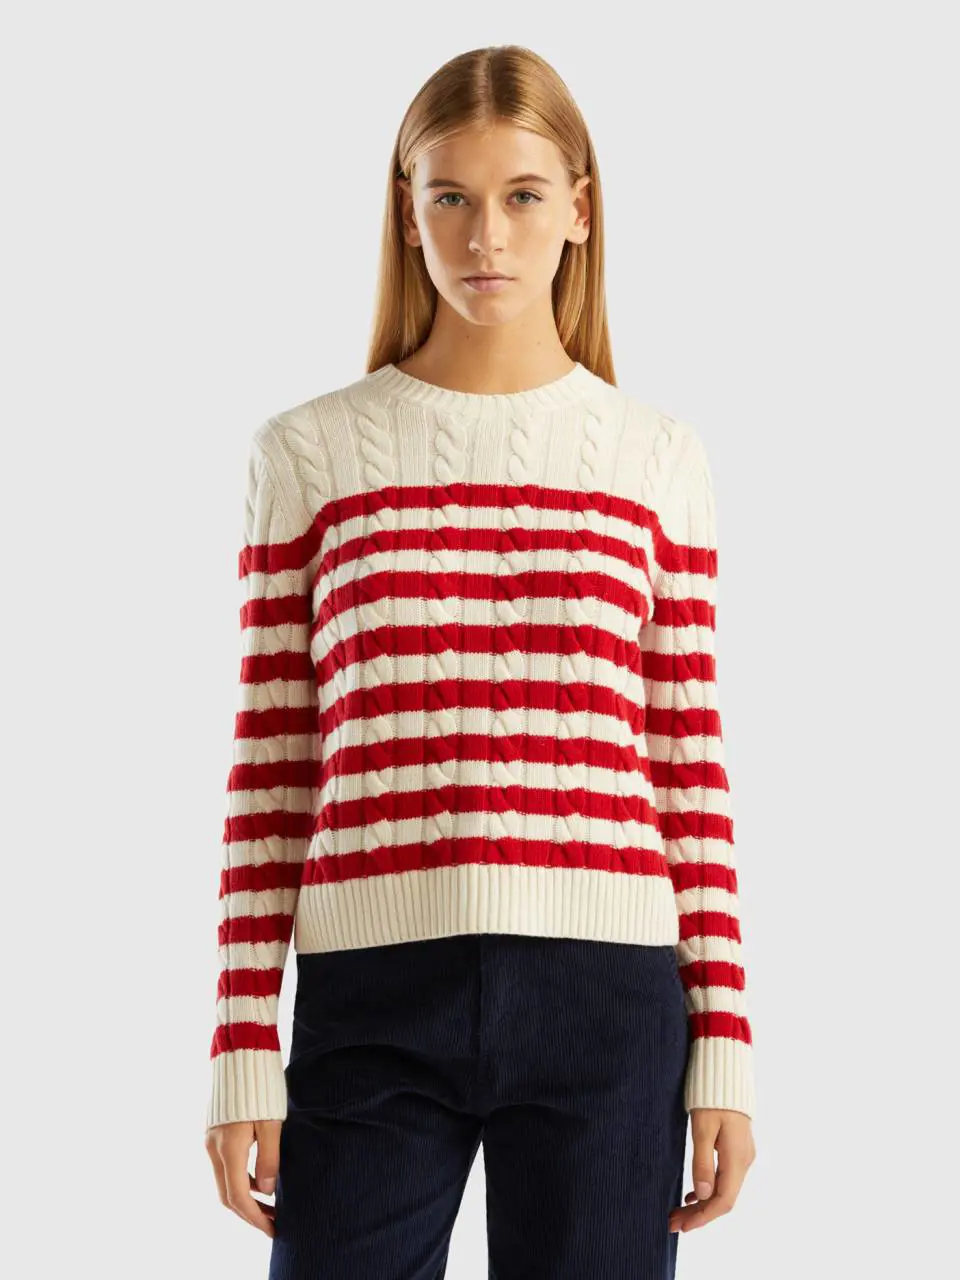 Benetton striped sweater with cables. 1